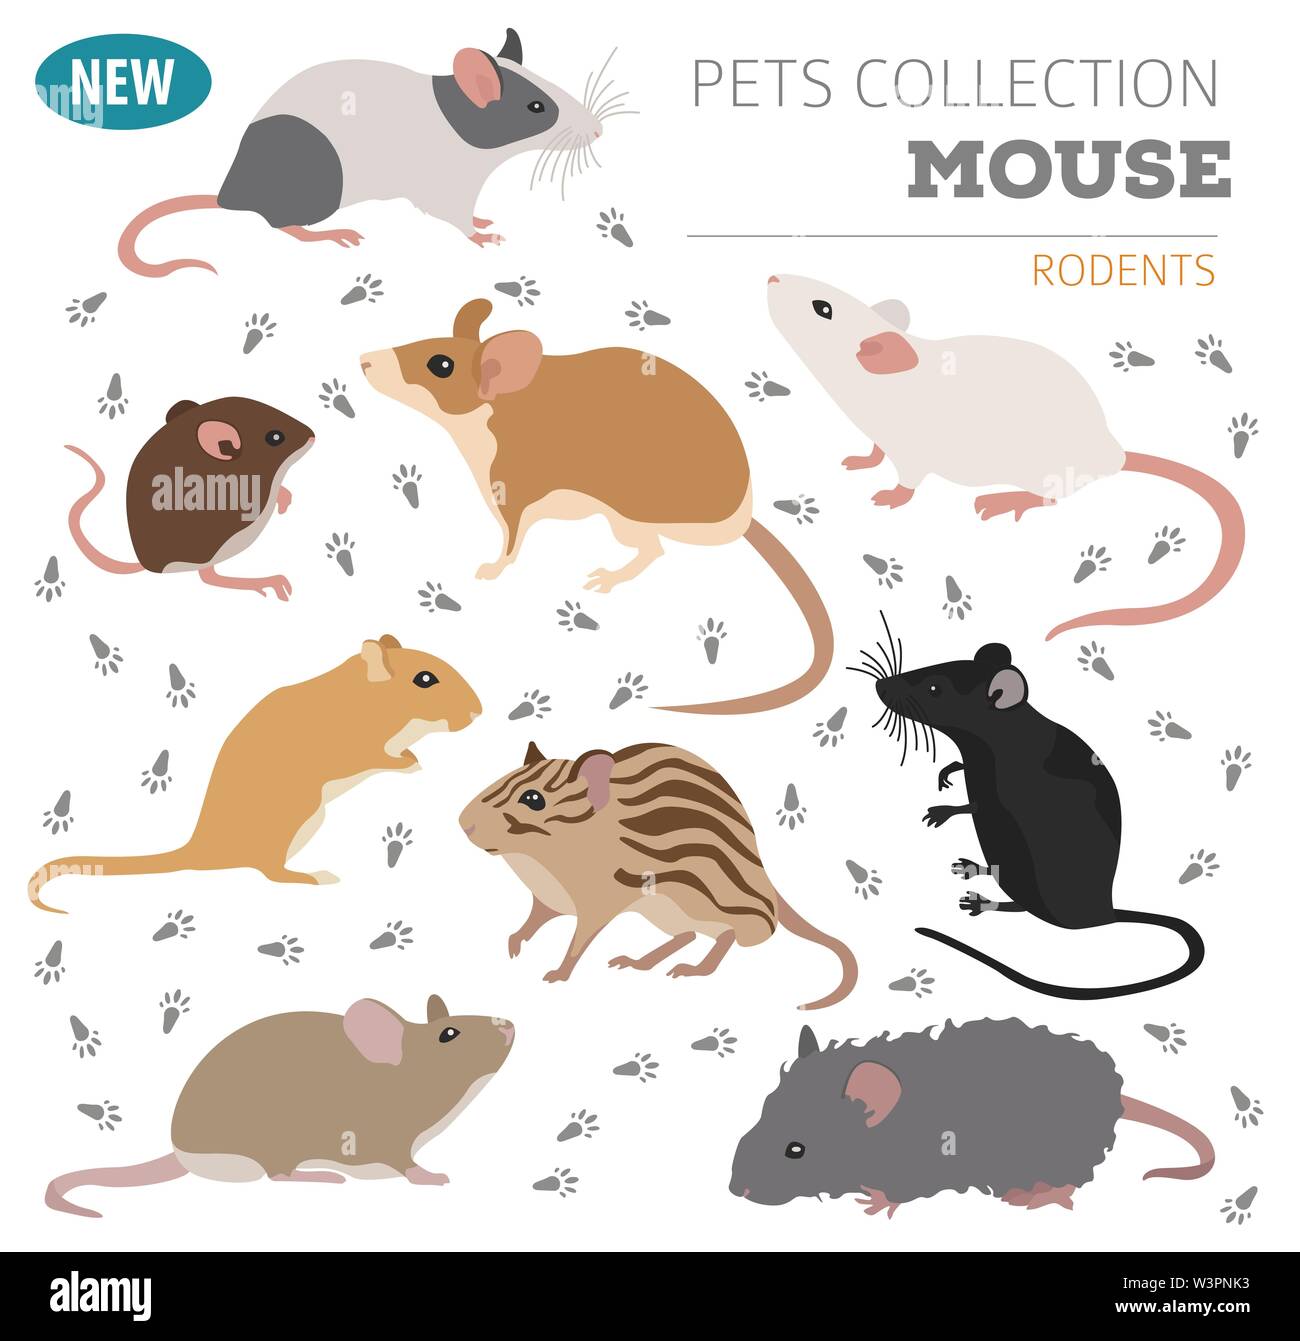 Mice breeds icon set flat style isolated on white. Mouse rodents collection. Create own infographic about pets. Vector illustration Stock Vector